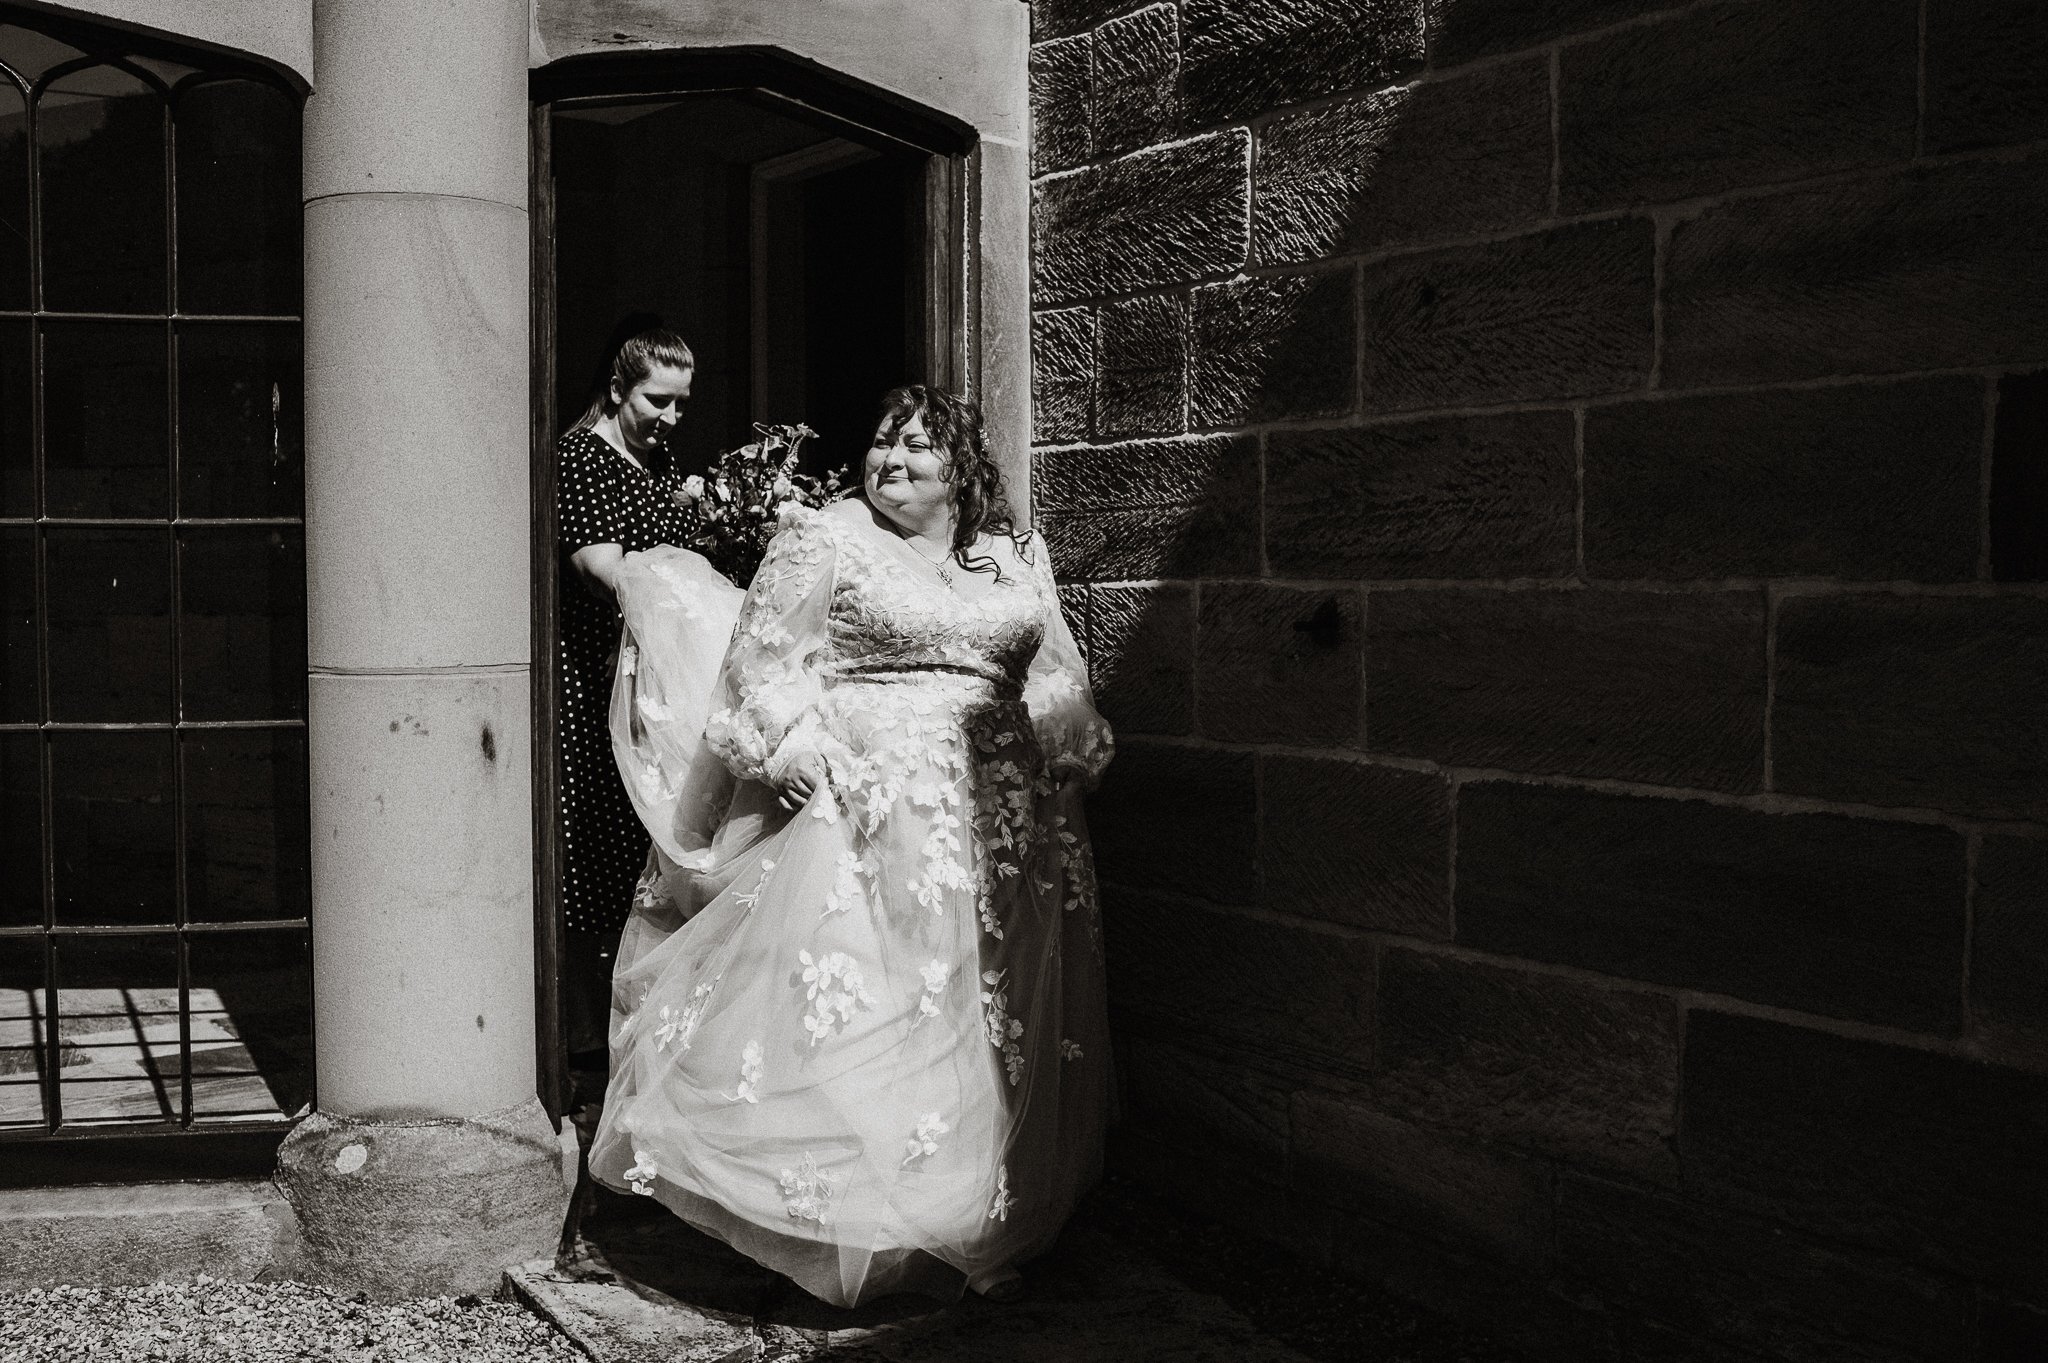 A black and white photograph of the bride leaving the bridal preparation room and heading to the ceremony room at Sneaton Castle, Whitby.